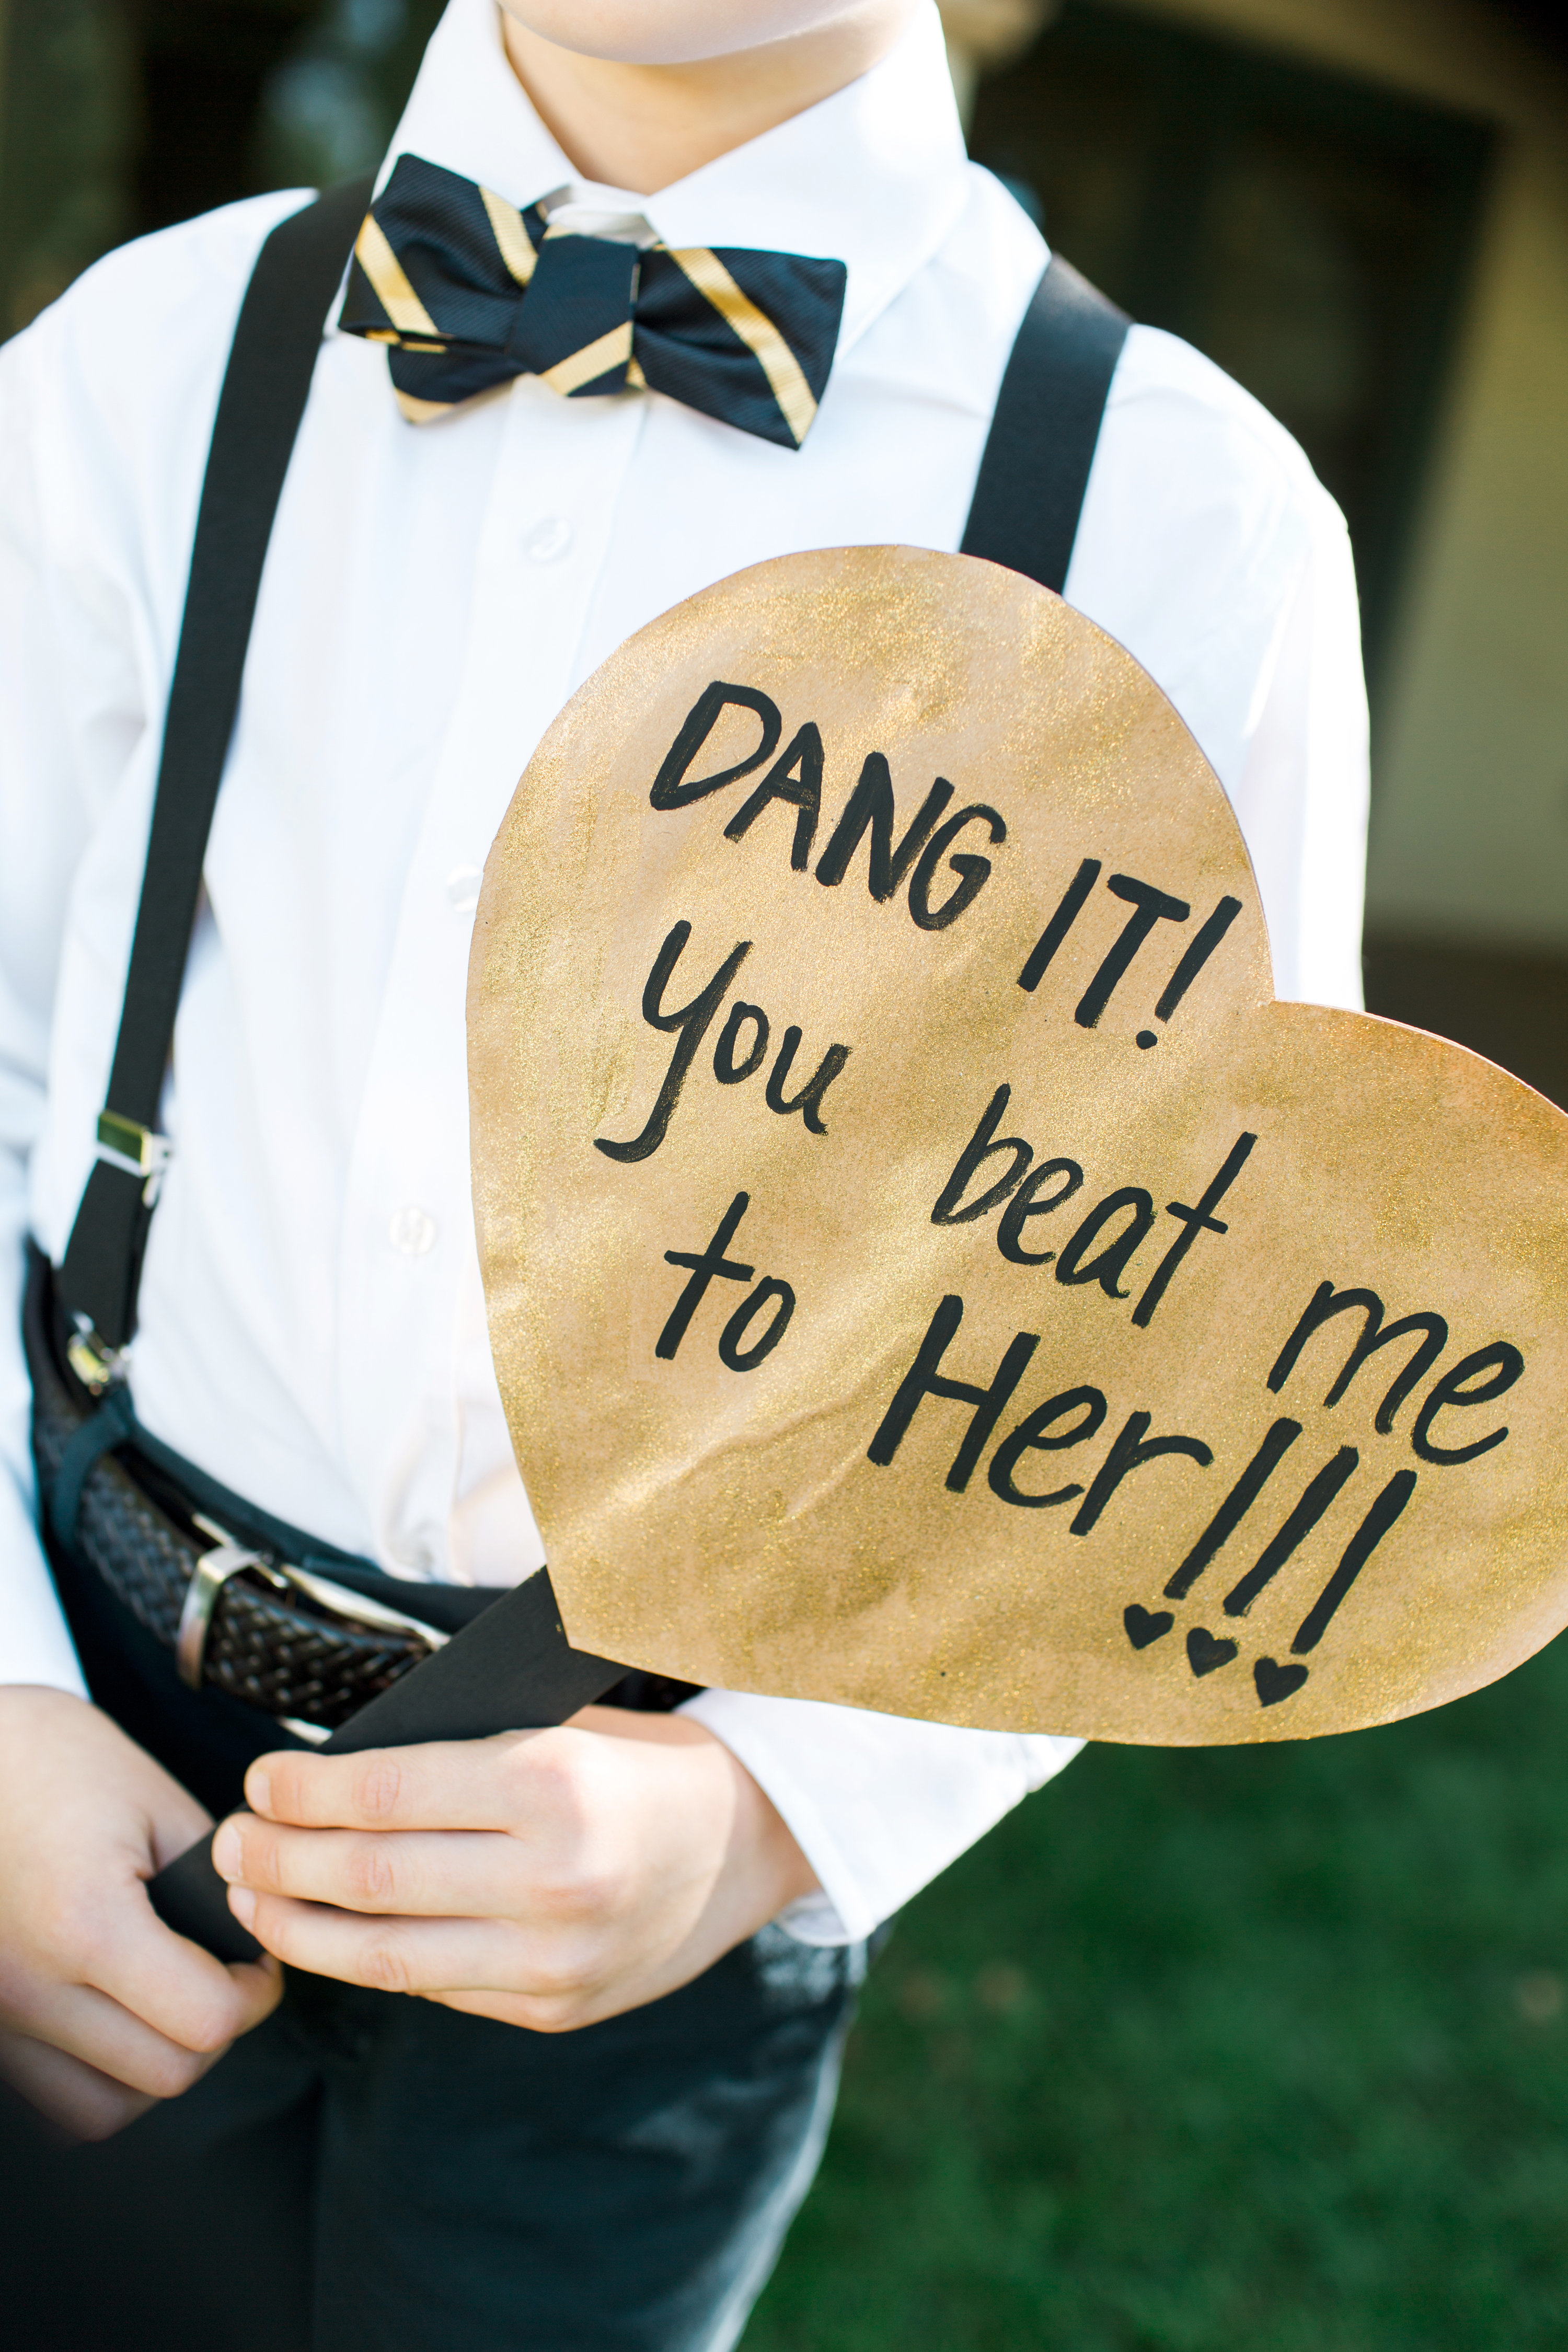 27 Incredibly Cute Ring Bearer Signs You'll Want For Your Wedding |  Mid-South Bride